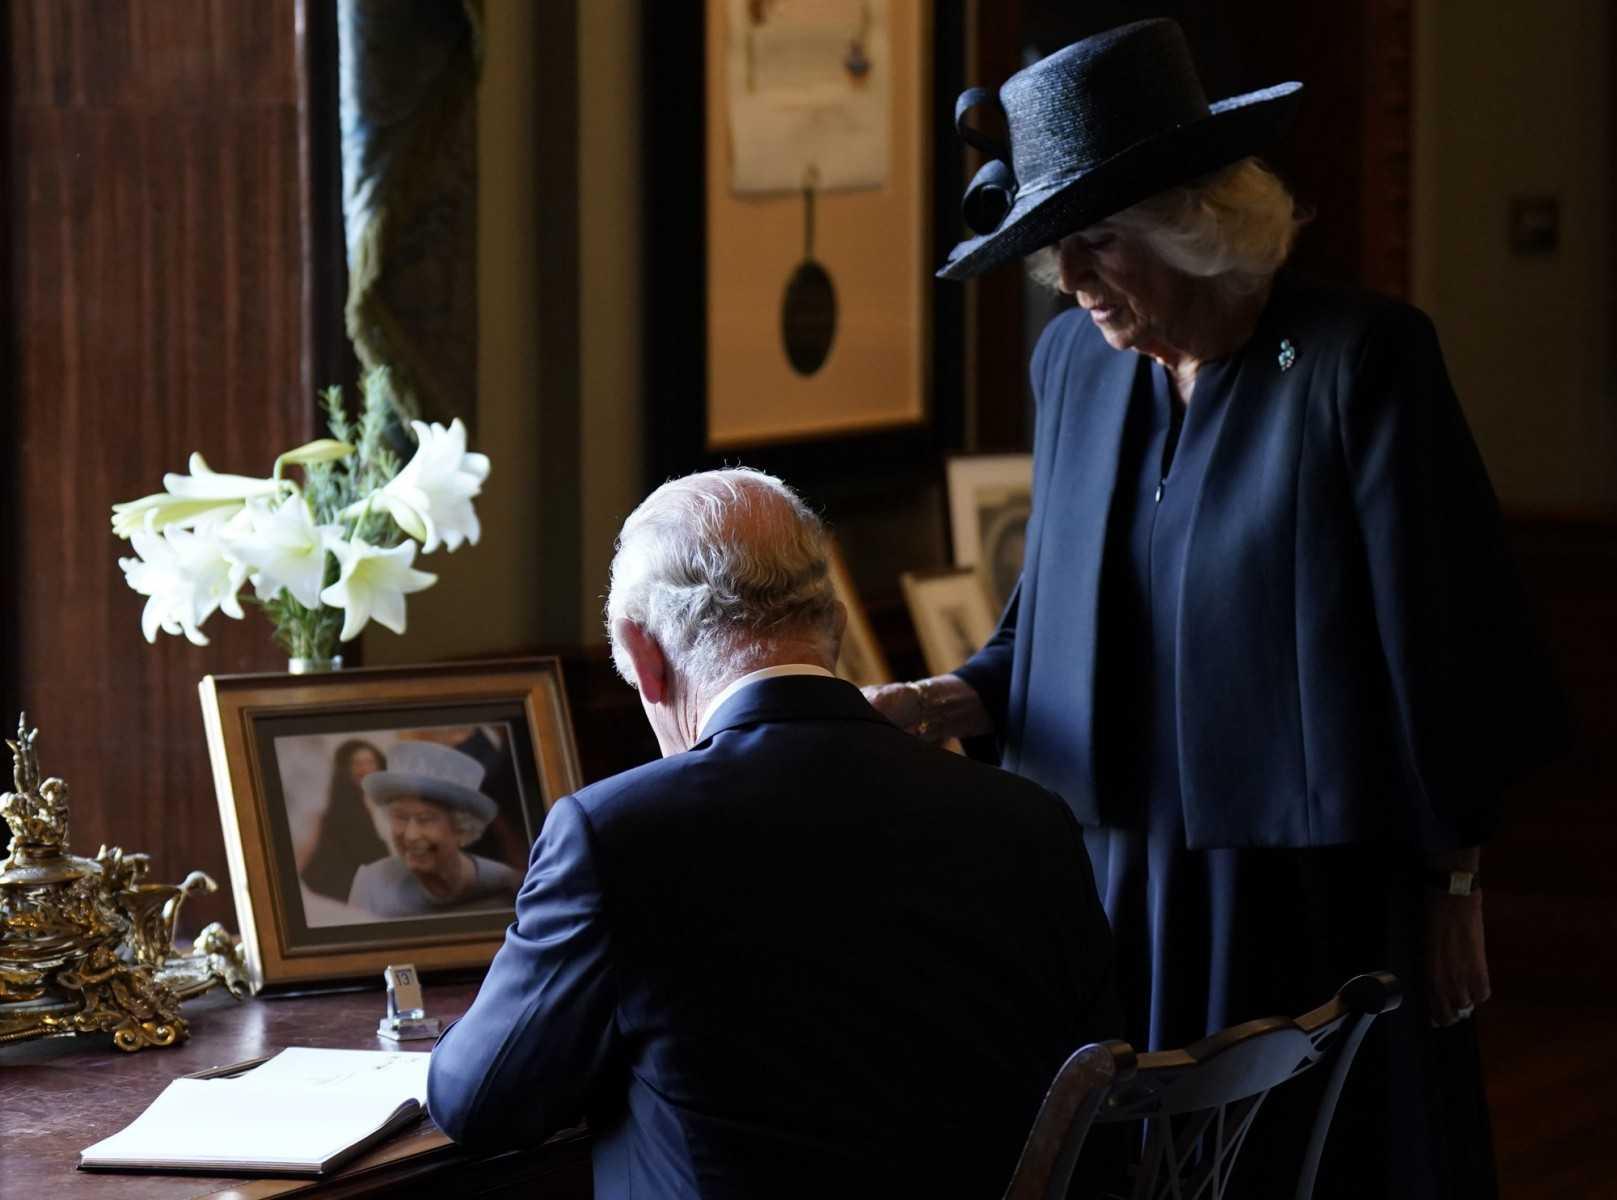 Britain's Camilla, Queen Consort (right) watches as Britain's King Charles III signs the visitors' book, alongside an image of his late mother Queen Elizabeth II, at Hillsborough Castle in Belfast on Sept 13, during his visit to Northern Ireland. Photo: AFP 